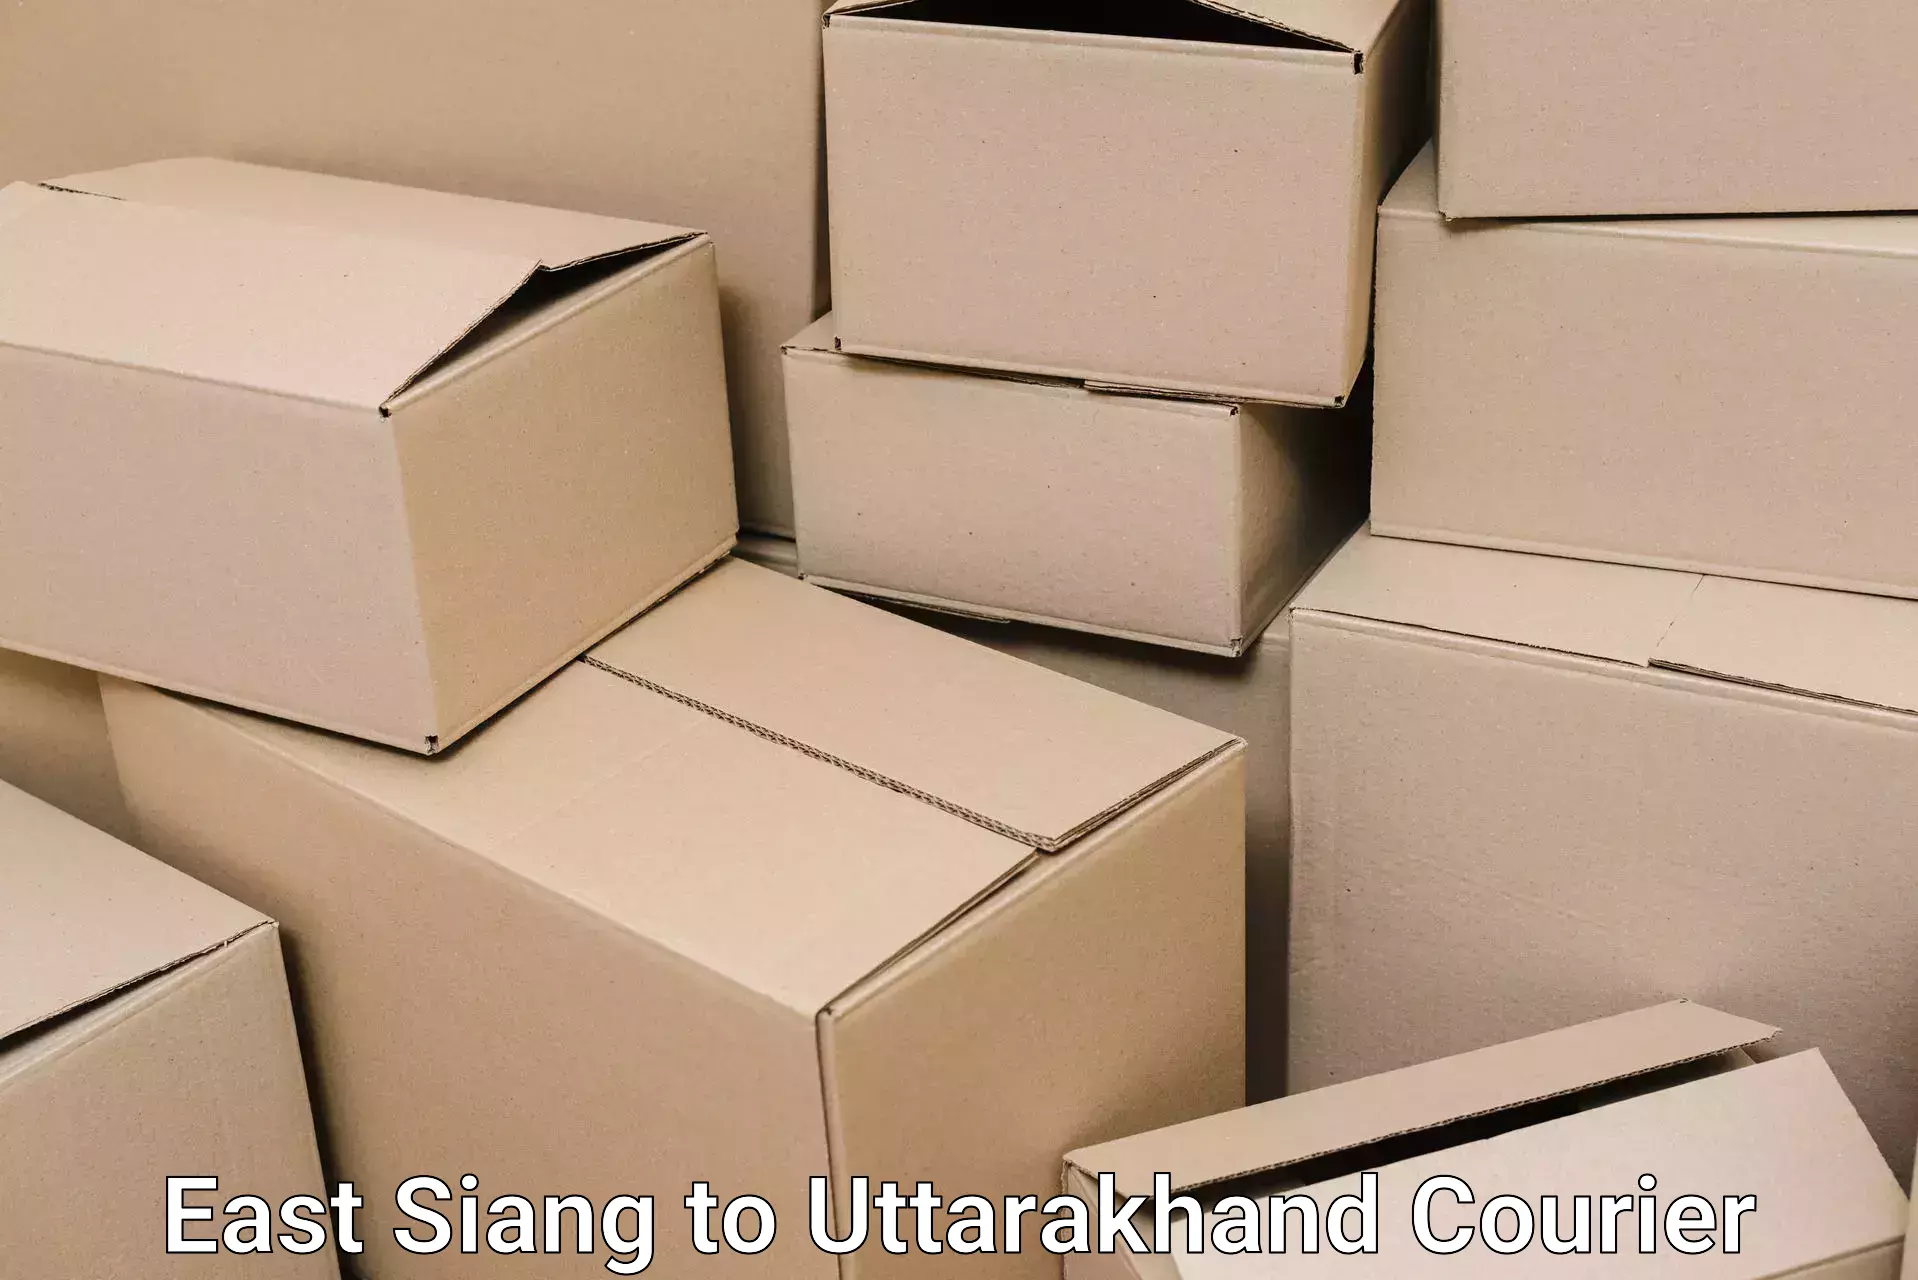 Furniture transport specialists East Siang to Uttarakhand